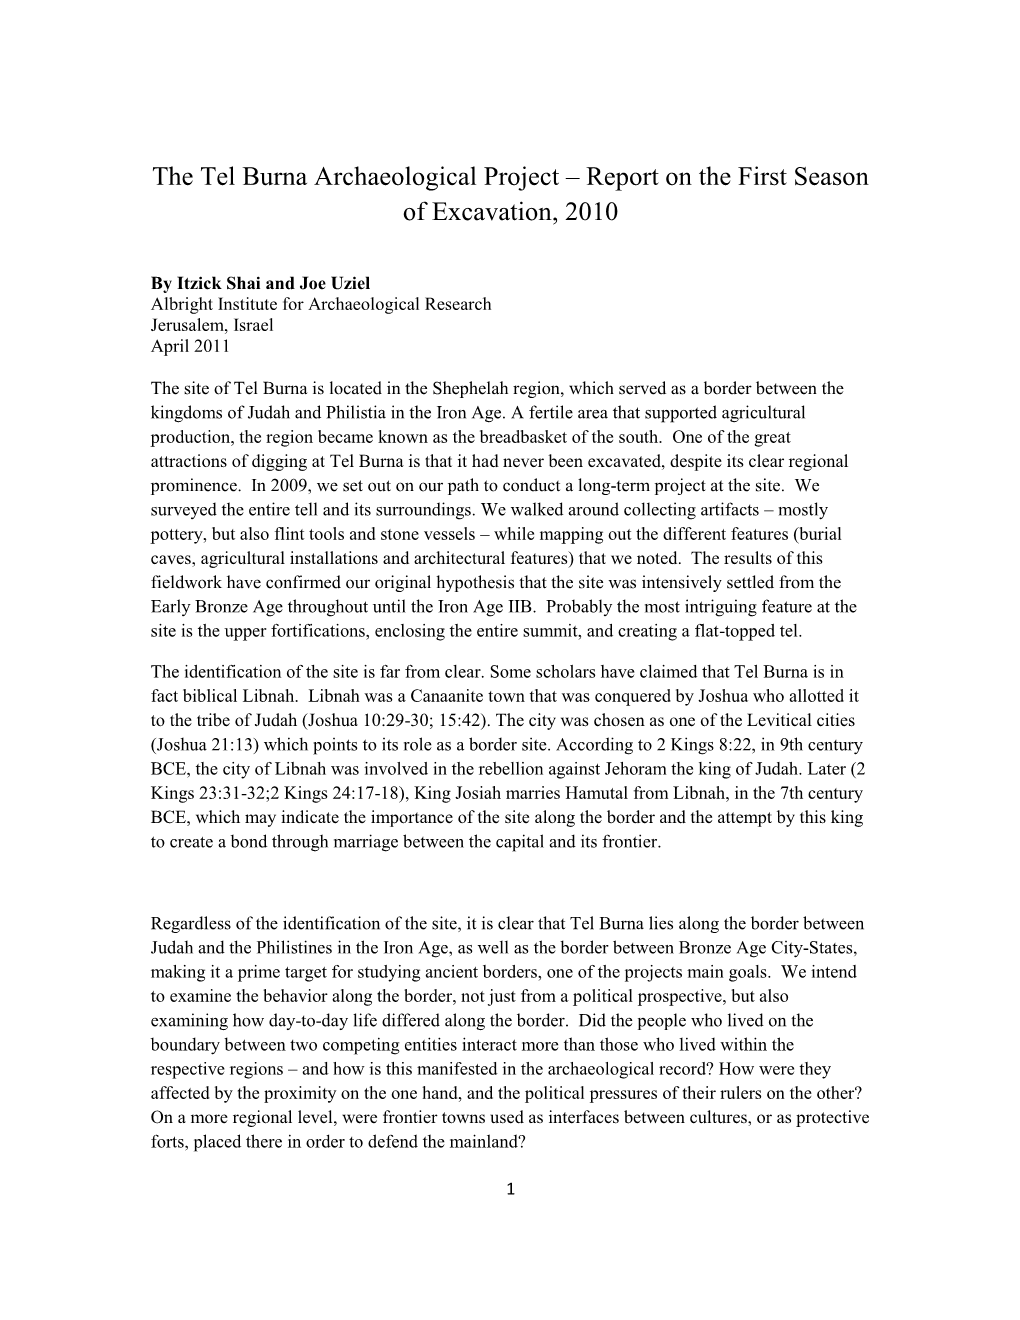 The Tel Burna Archaeological Project – Report on the First Season of Excavation, 2010